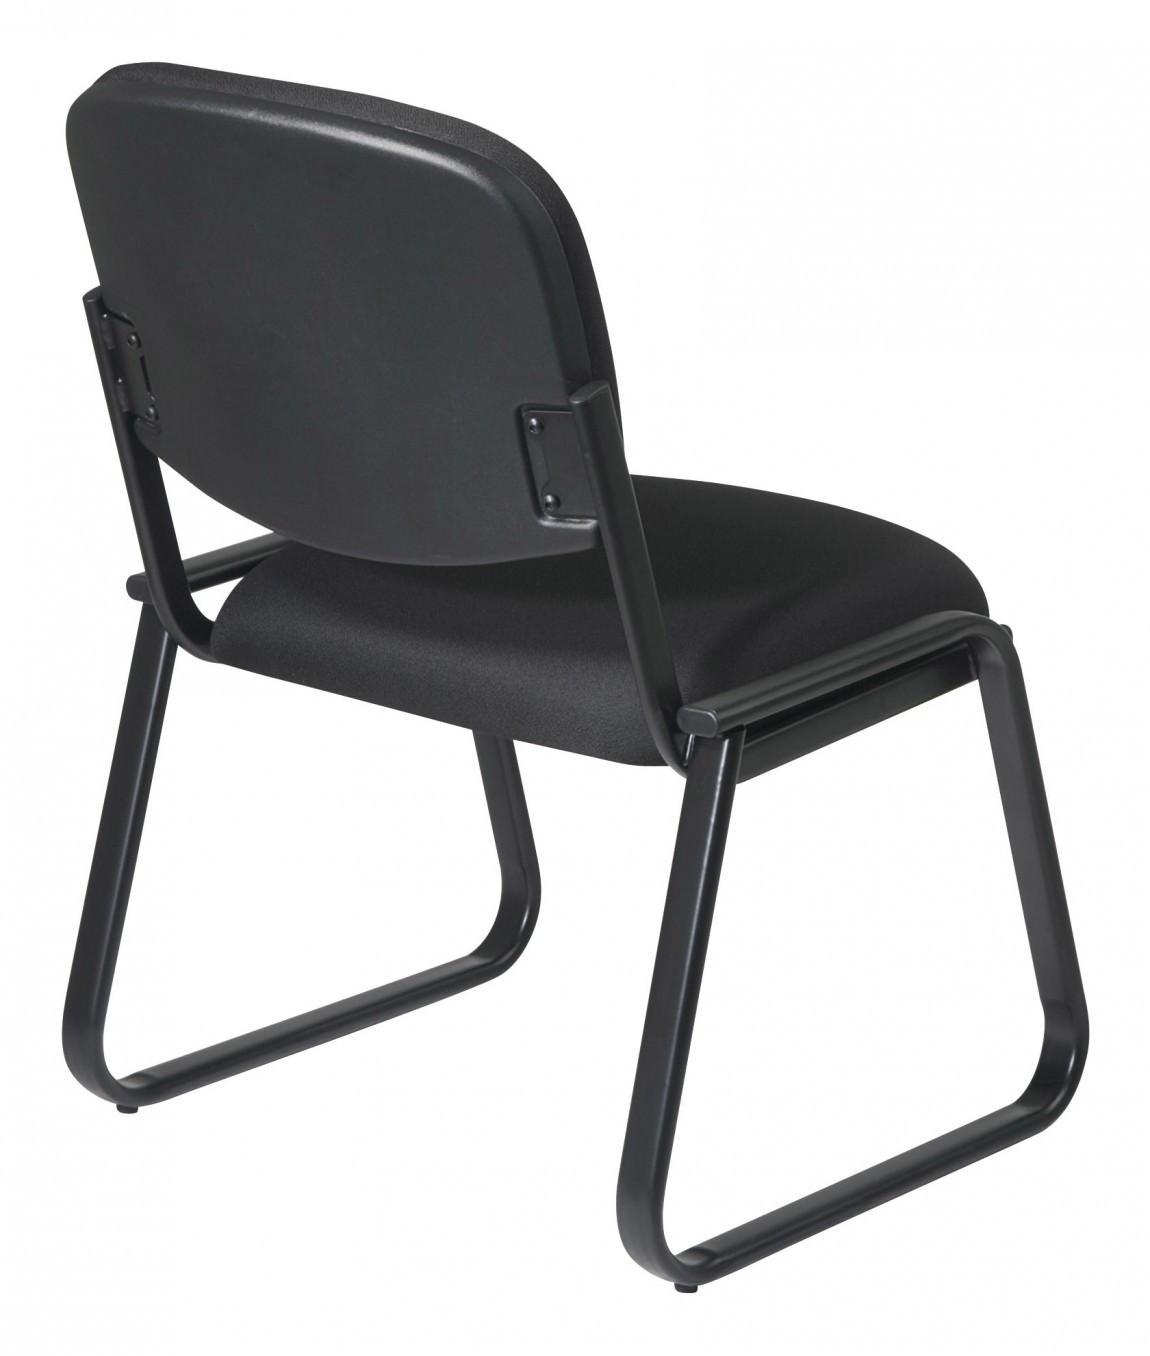 Deluxe Armless Reception Chair